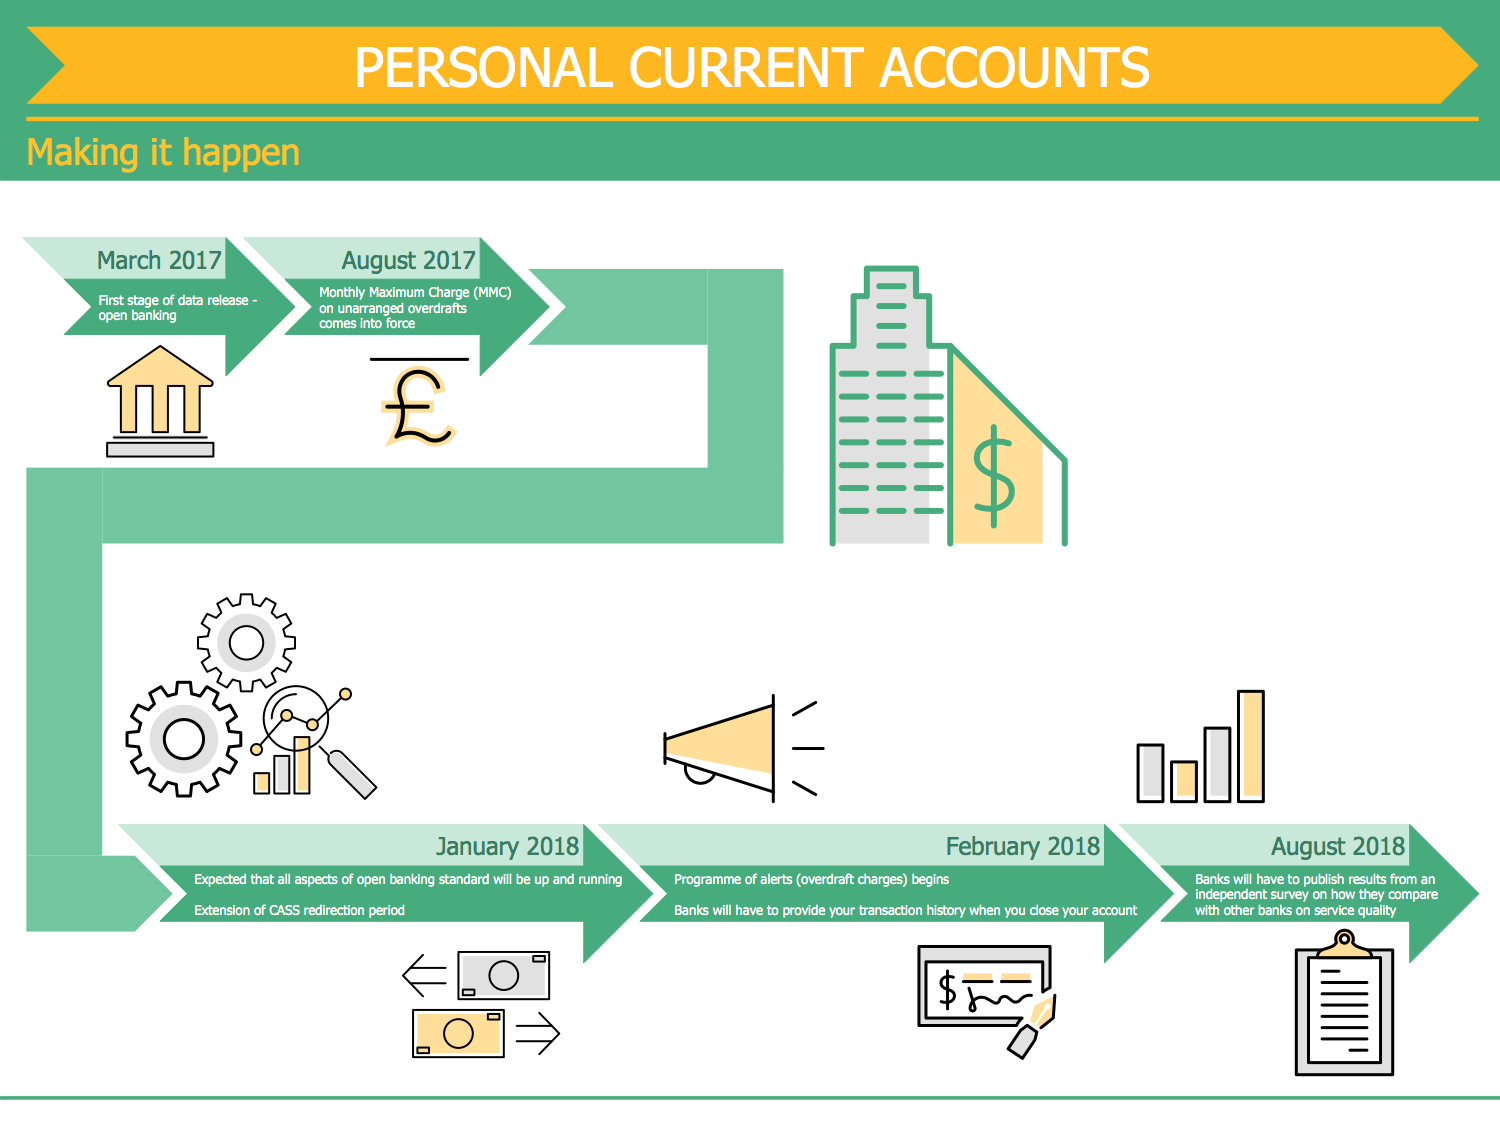 Personal Current Accounts Timeline